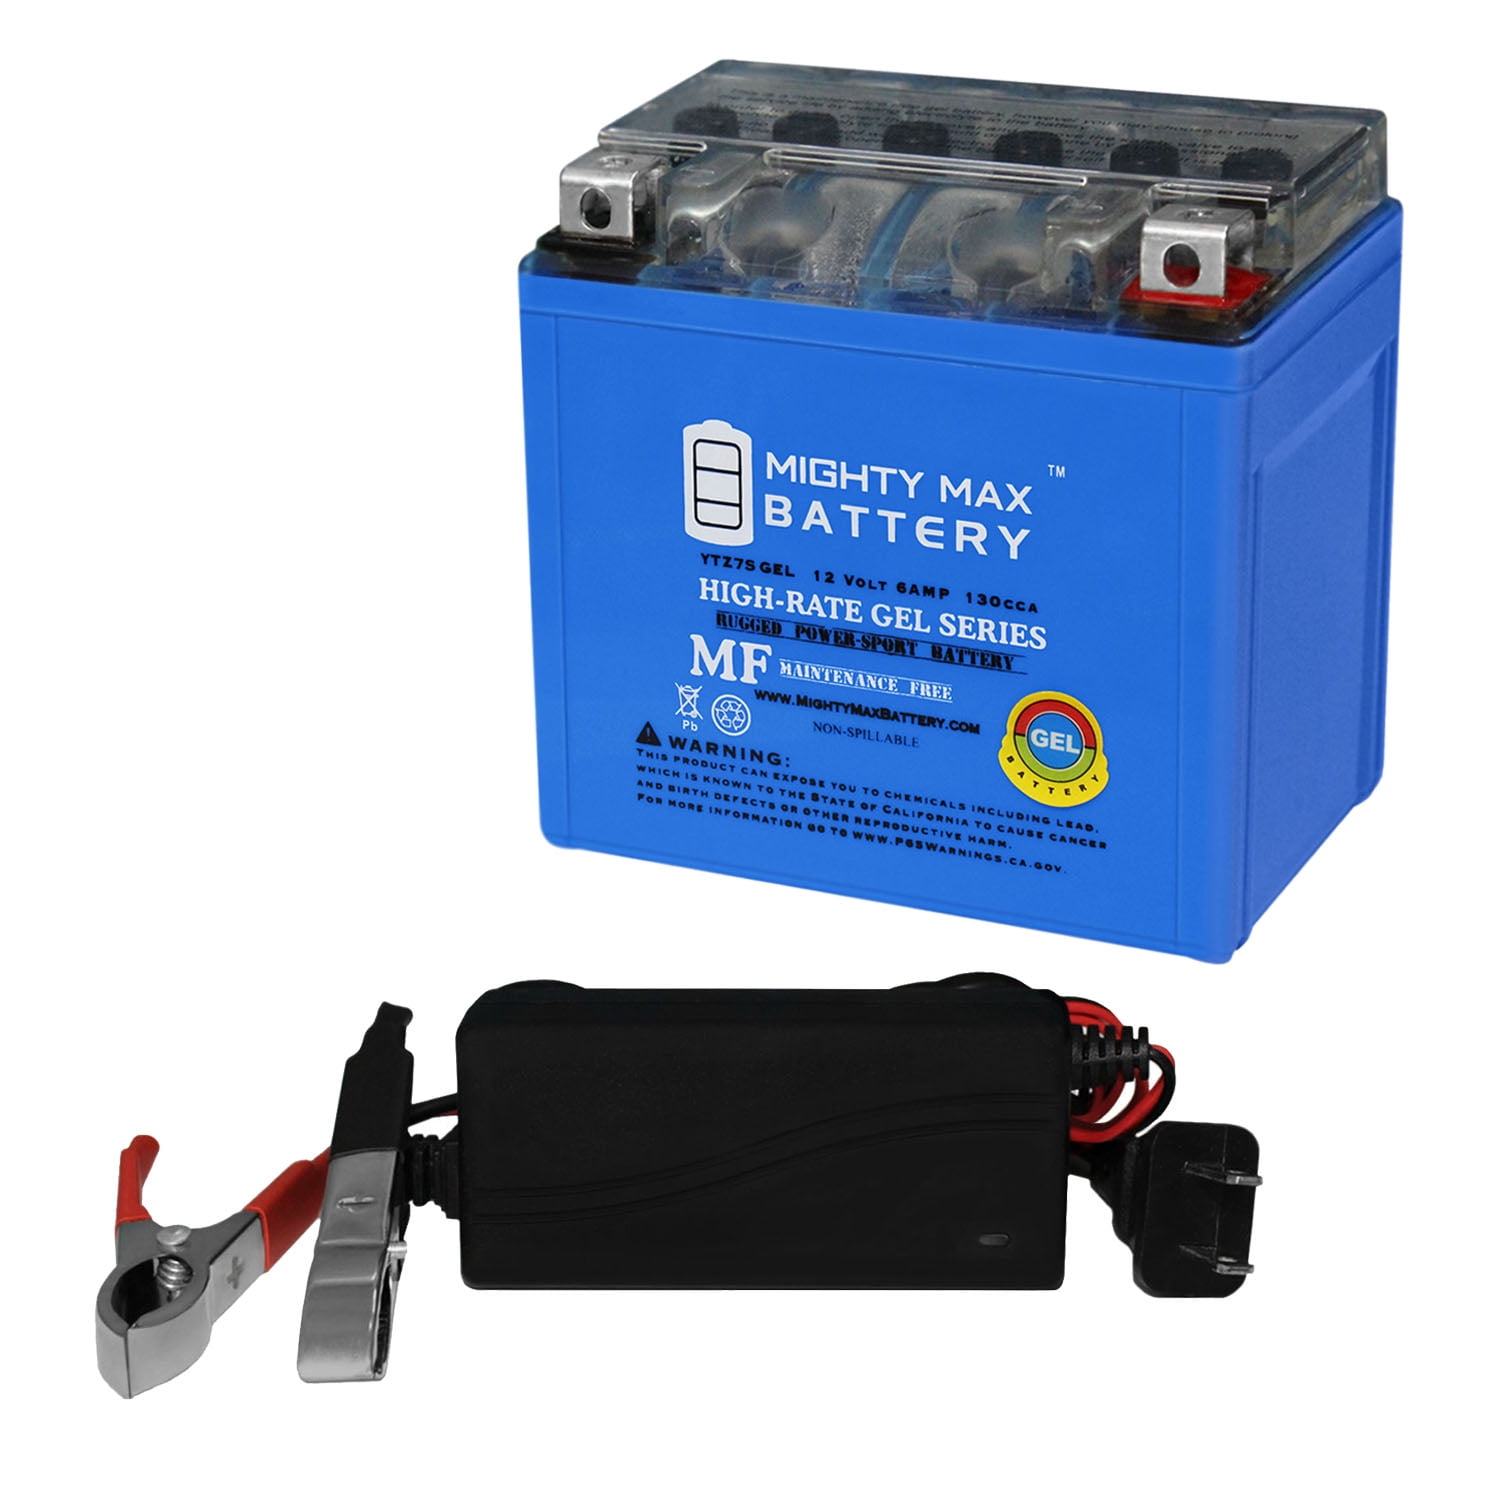 Enduro Power 12V 20A Lithium Battery Charger – Enduro Power Lithium  Batteries - Long Lasting Performance